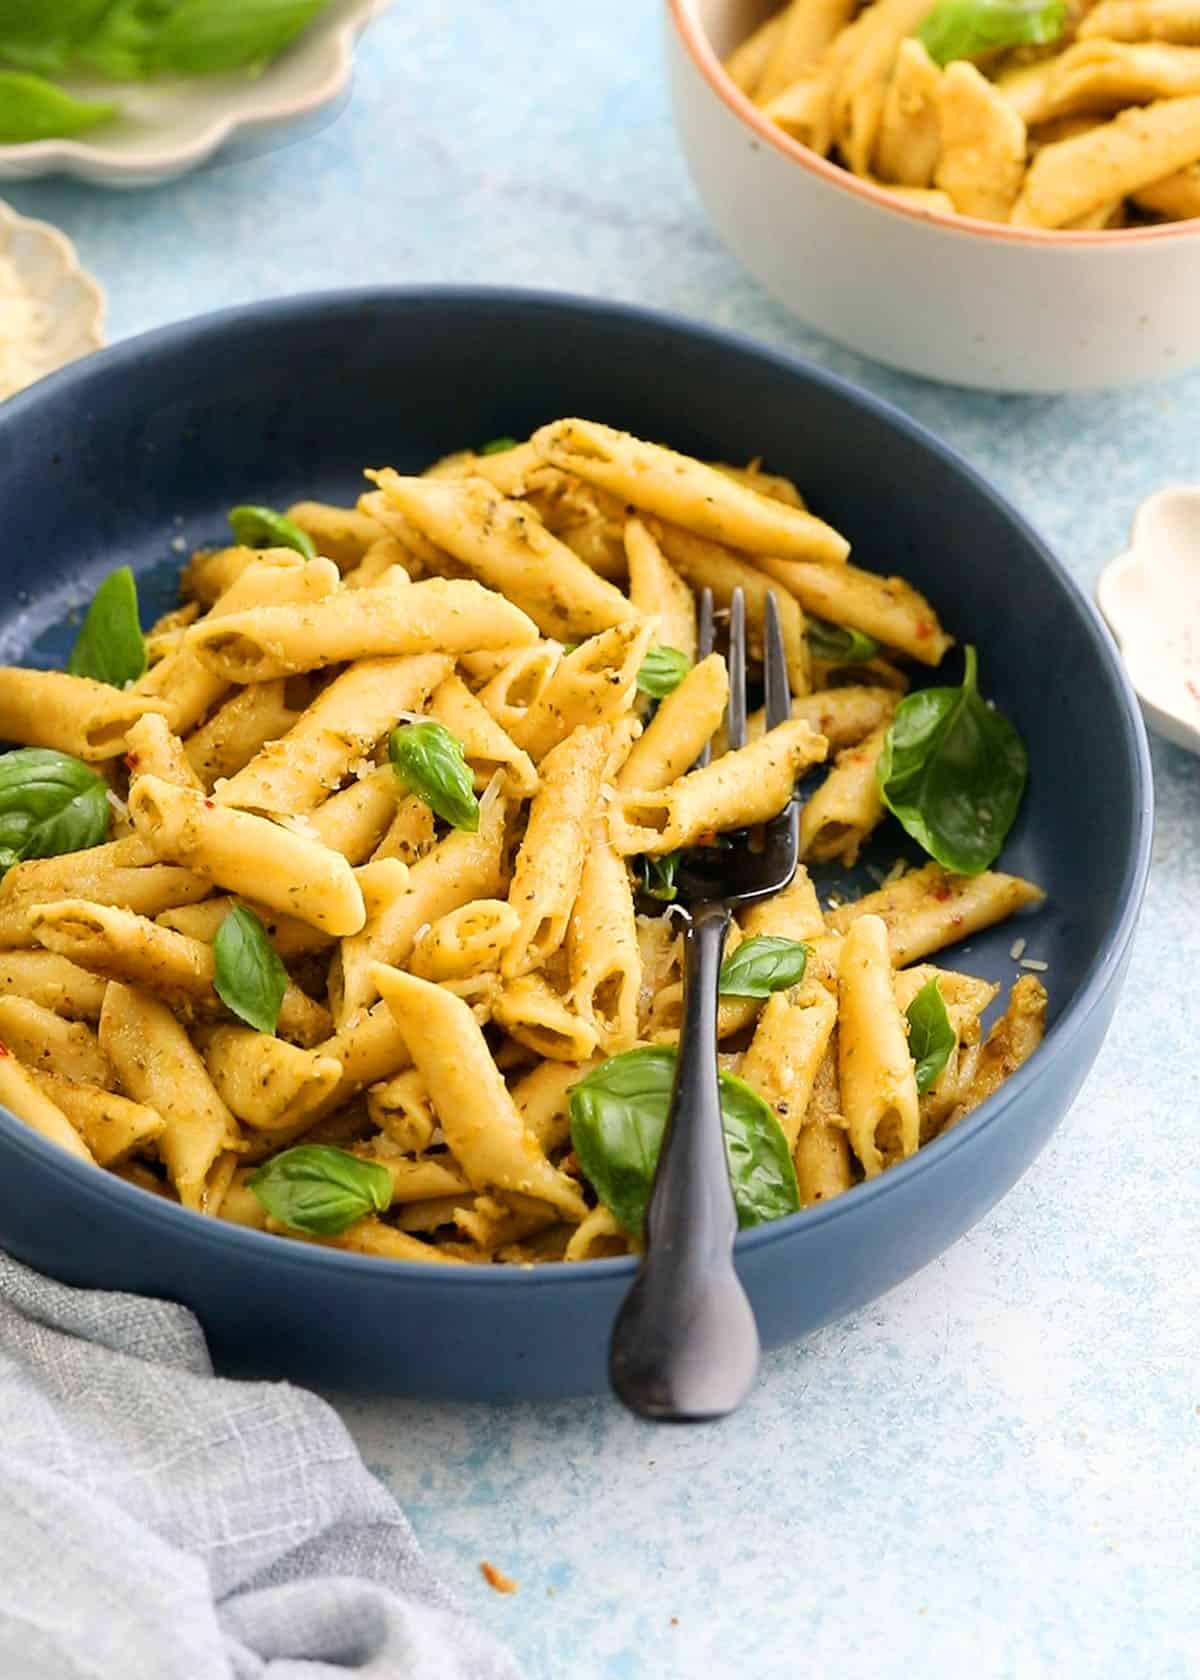 cooked penne pesto pasta in a large blue bowl along with a black fork.